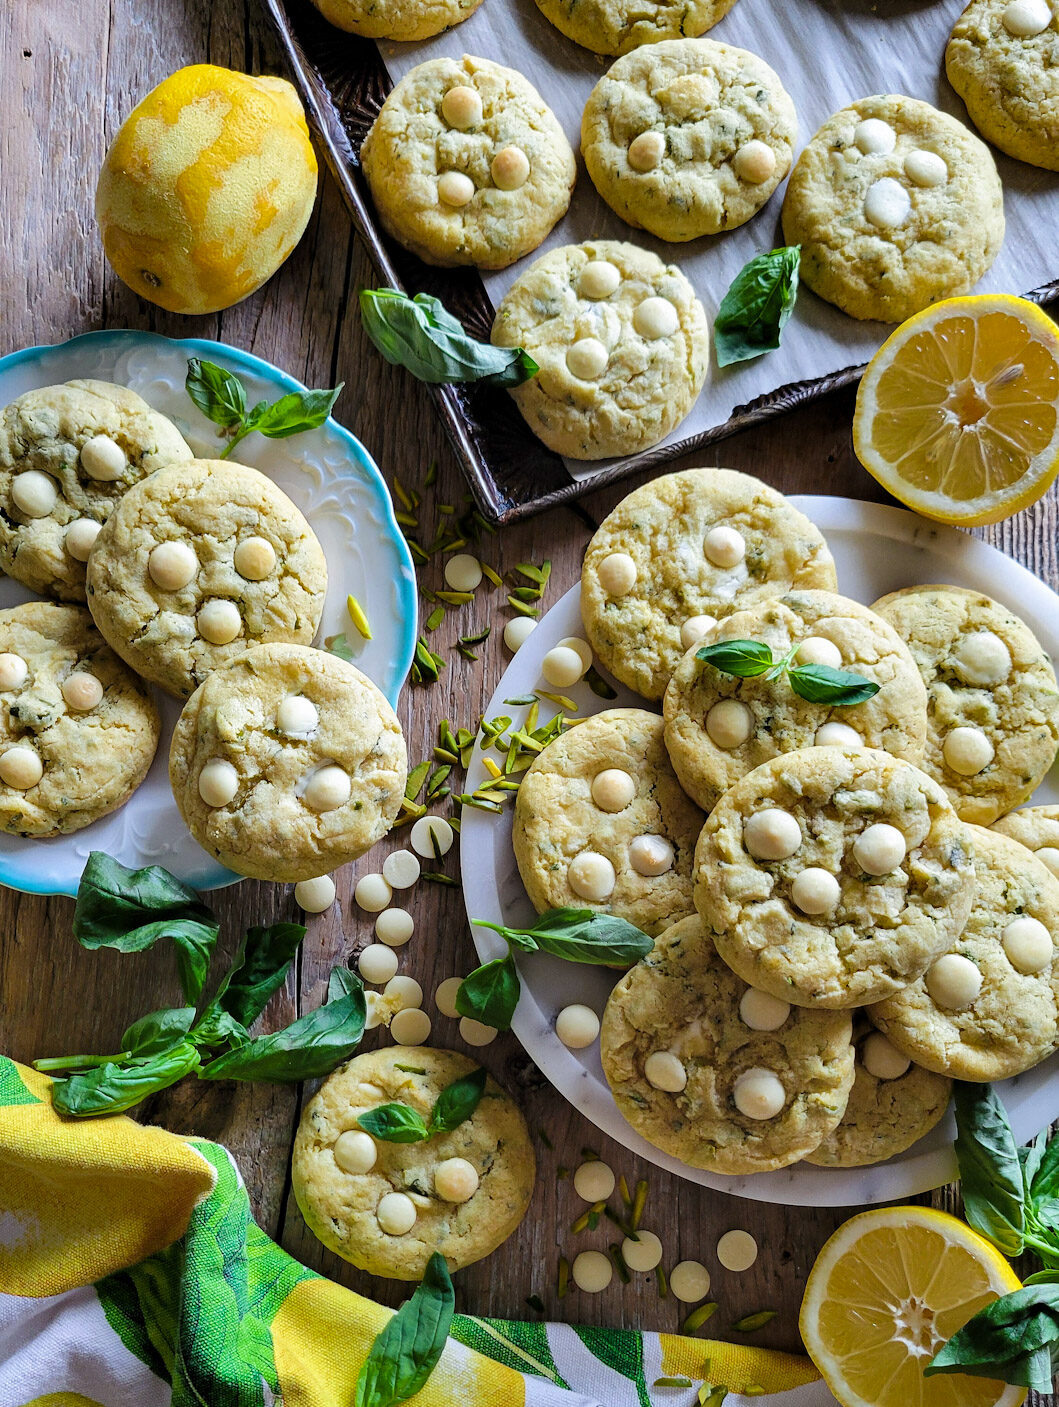 A sea of Lemon Basil Cookies with White Chocolate and Pistachios spread out on plates and baking sheet, surrounded by fresh basil leaves and sliced lemons.